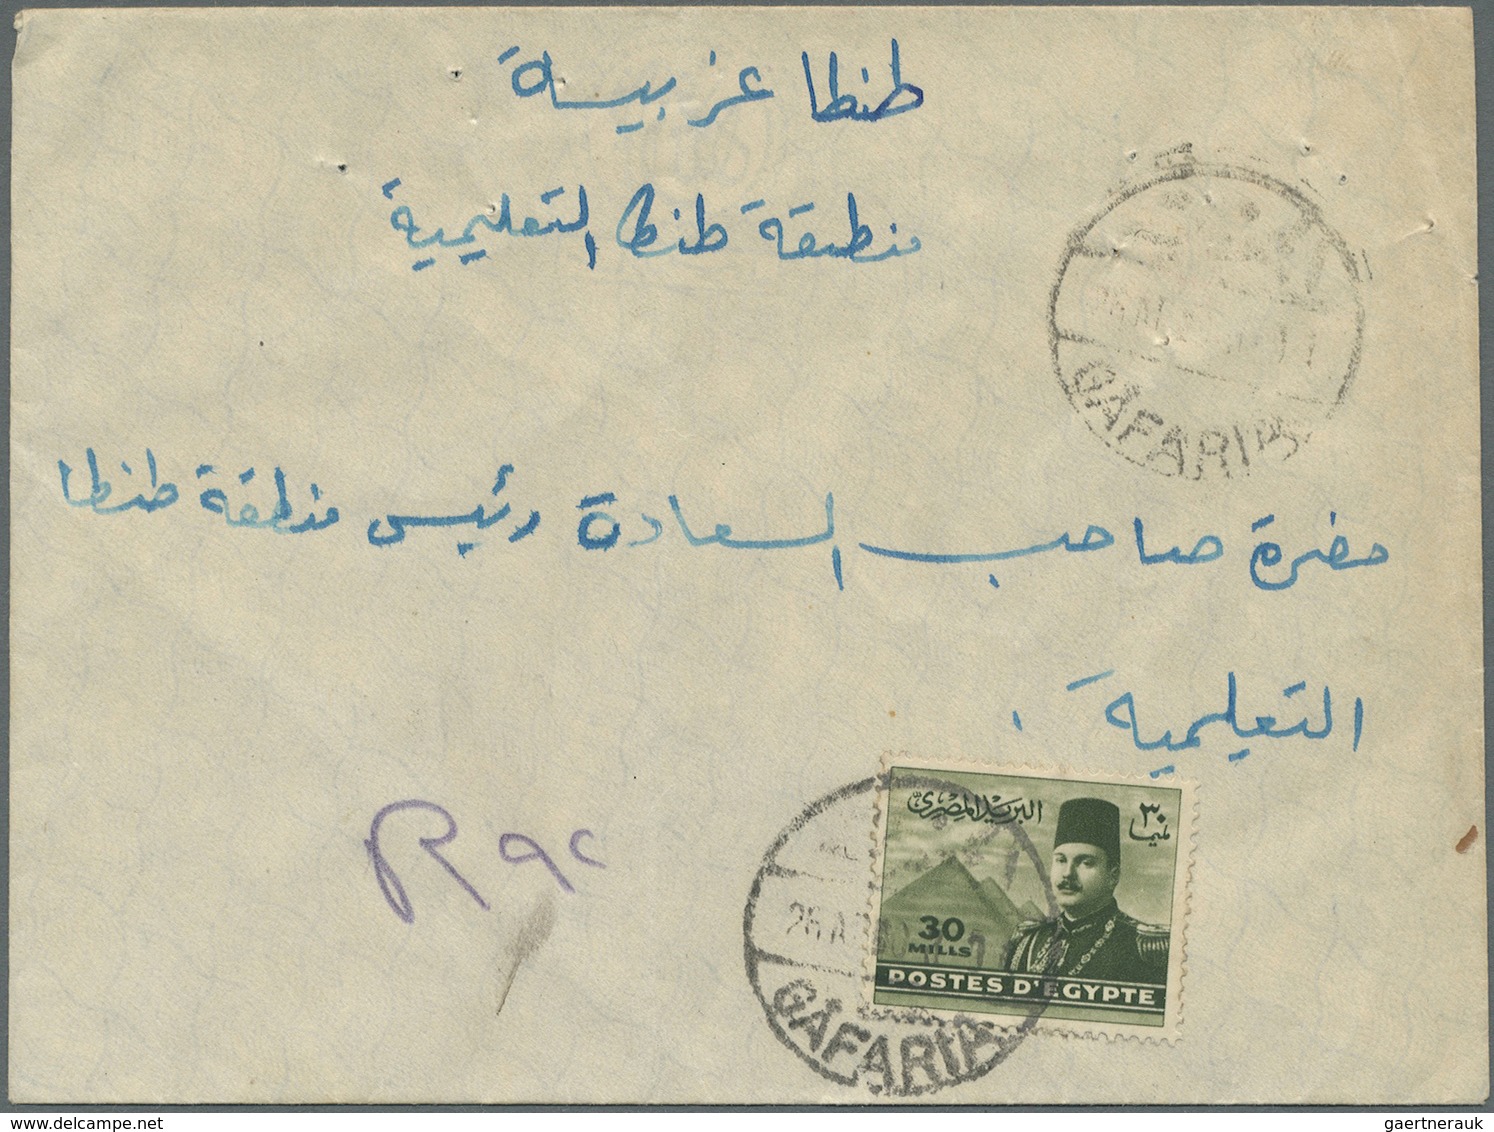 Br/GA Ägypten: 1899-50's ca., Group of 35 selected covers to Europe or domestic with interesting postmarks